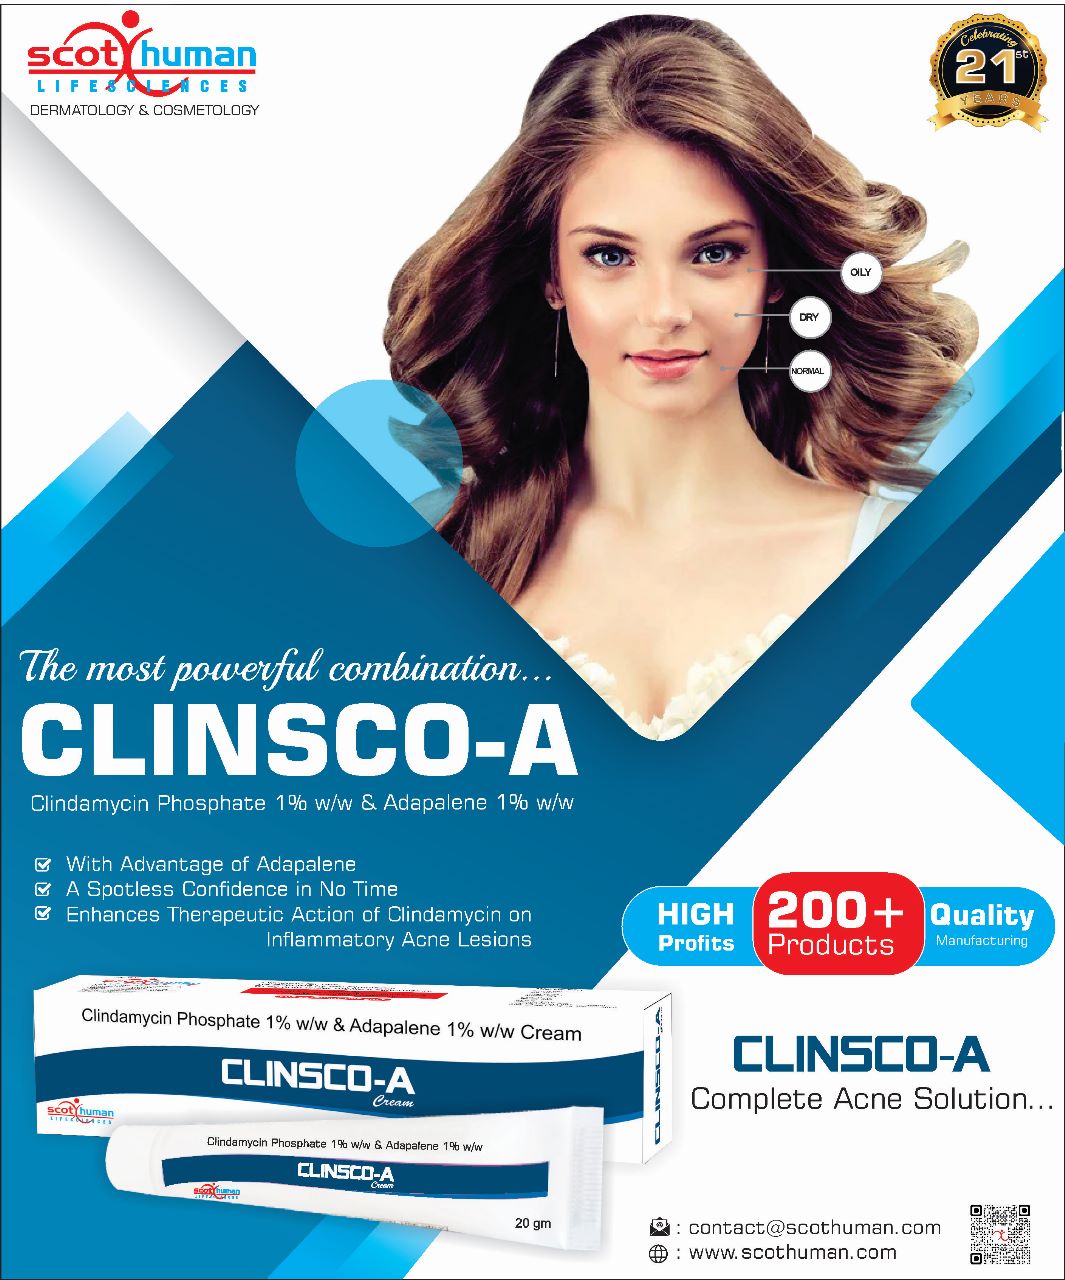 Product Name: Clinsco A, Compositions of Clinsco A are Clindamycin Phsophate & Adapaiene - Pharma Drugs and Chemicals